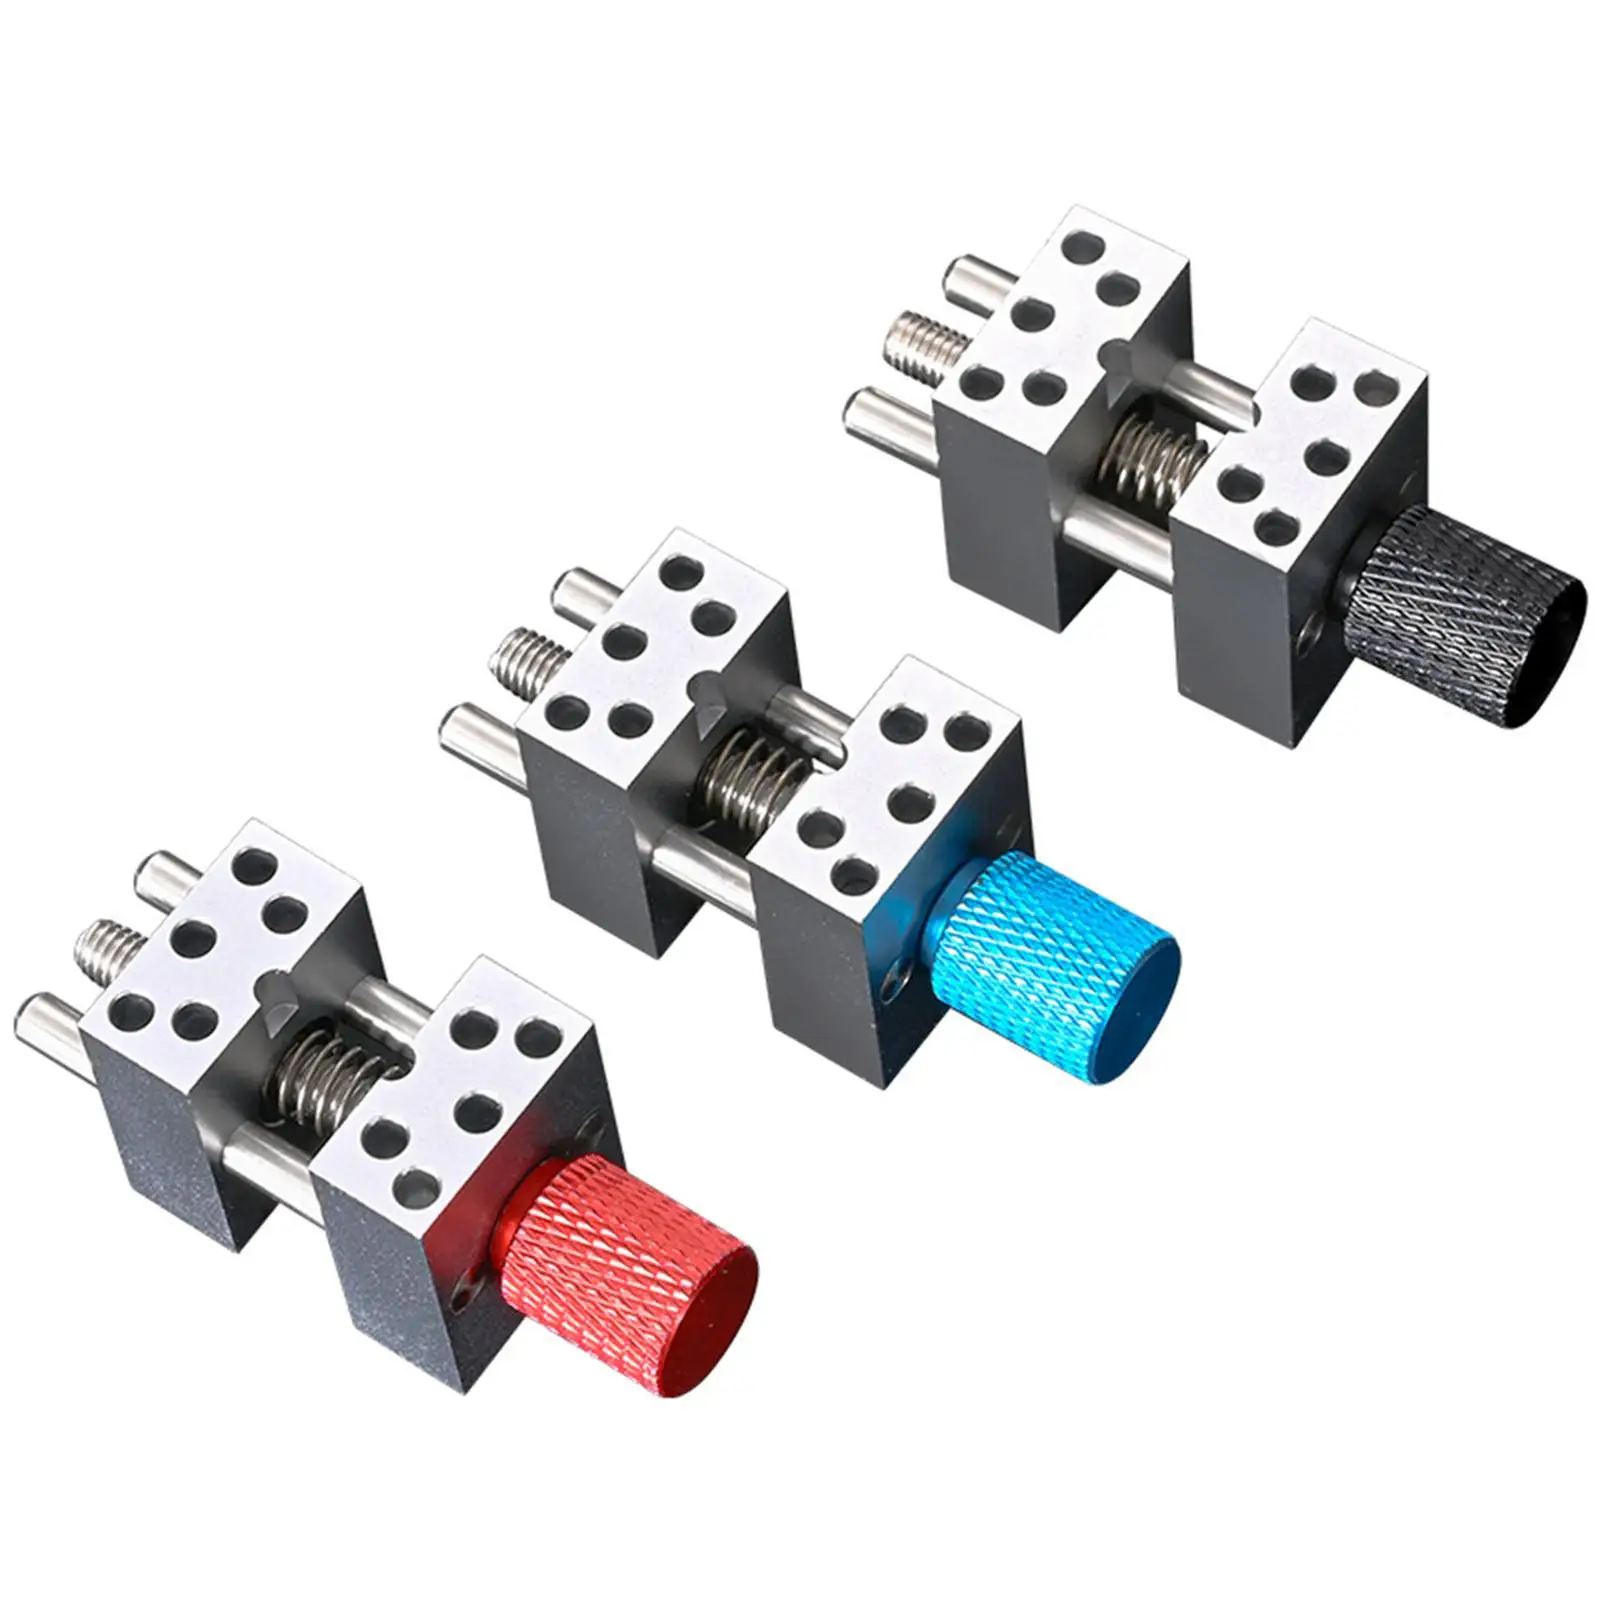 Universal Mini Drill Press Vise Clamp for Watch Electronics Model Parts Engraving Cutting Coloring Jewelry Model Building Tools